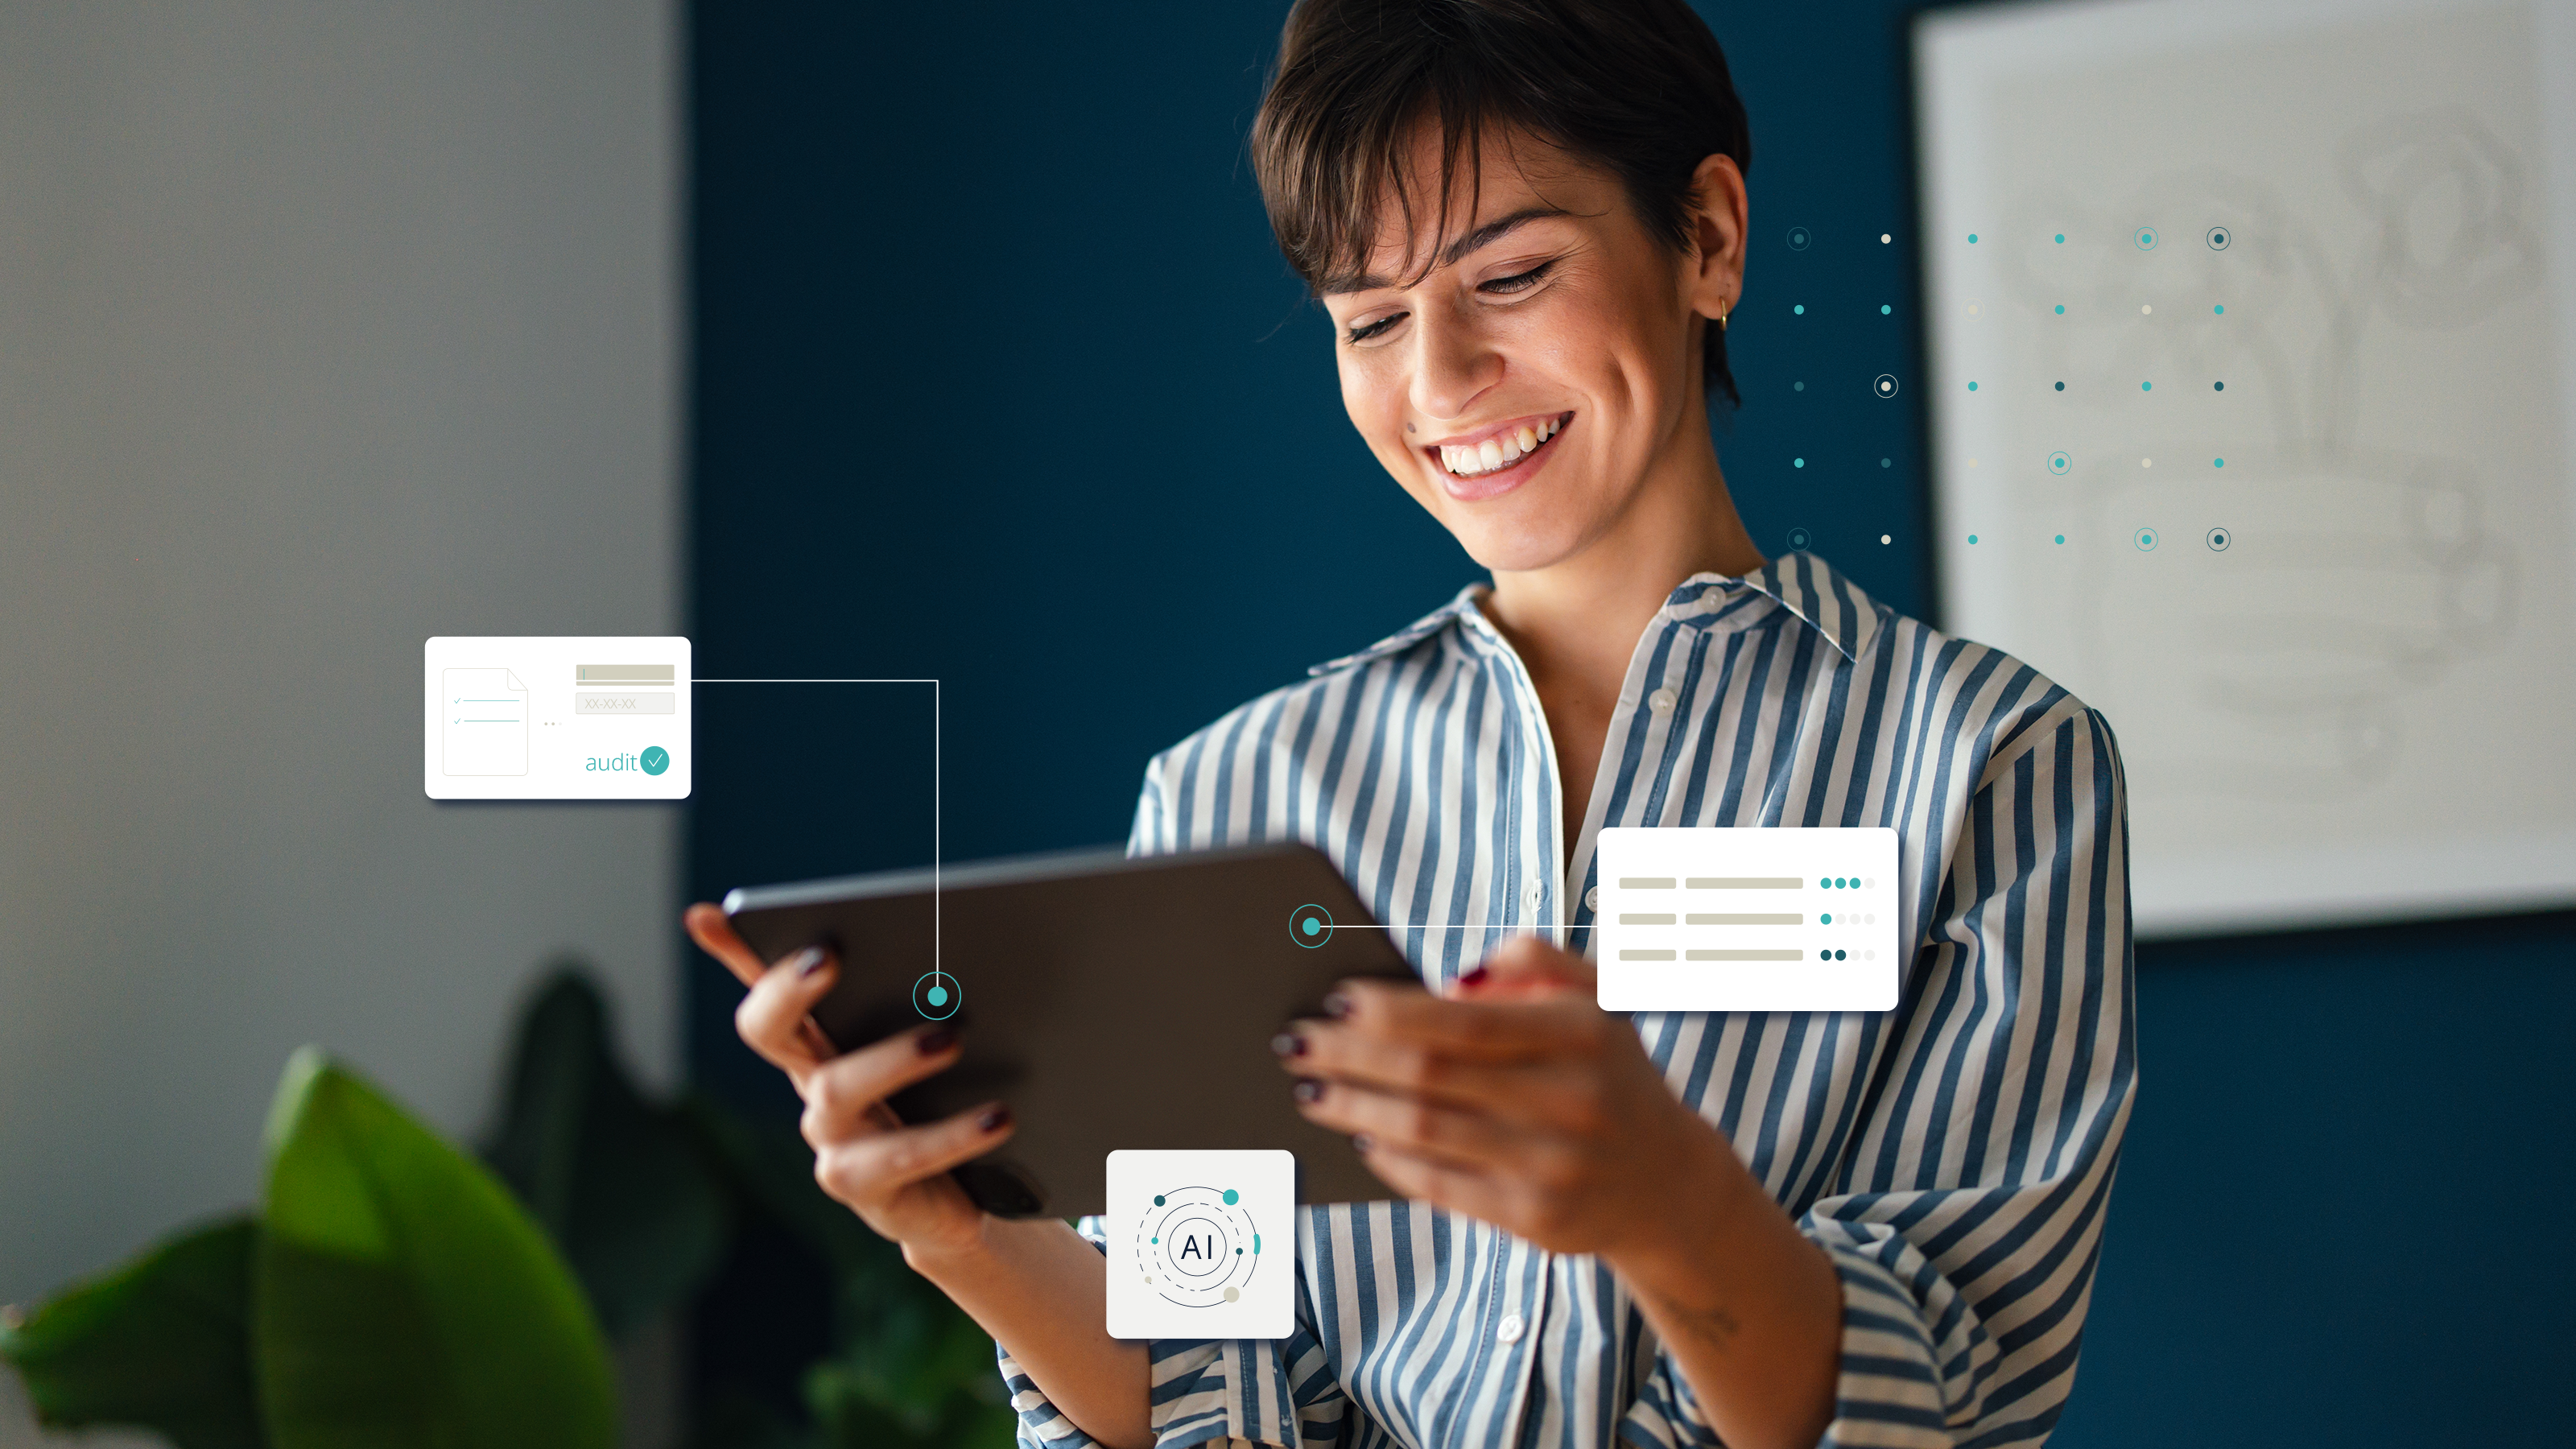 A woman looks smiling at her screen and a logo in the upper left corner says AI